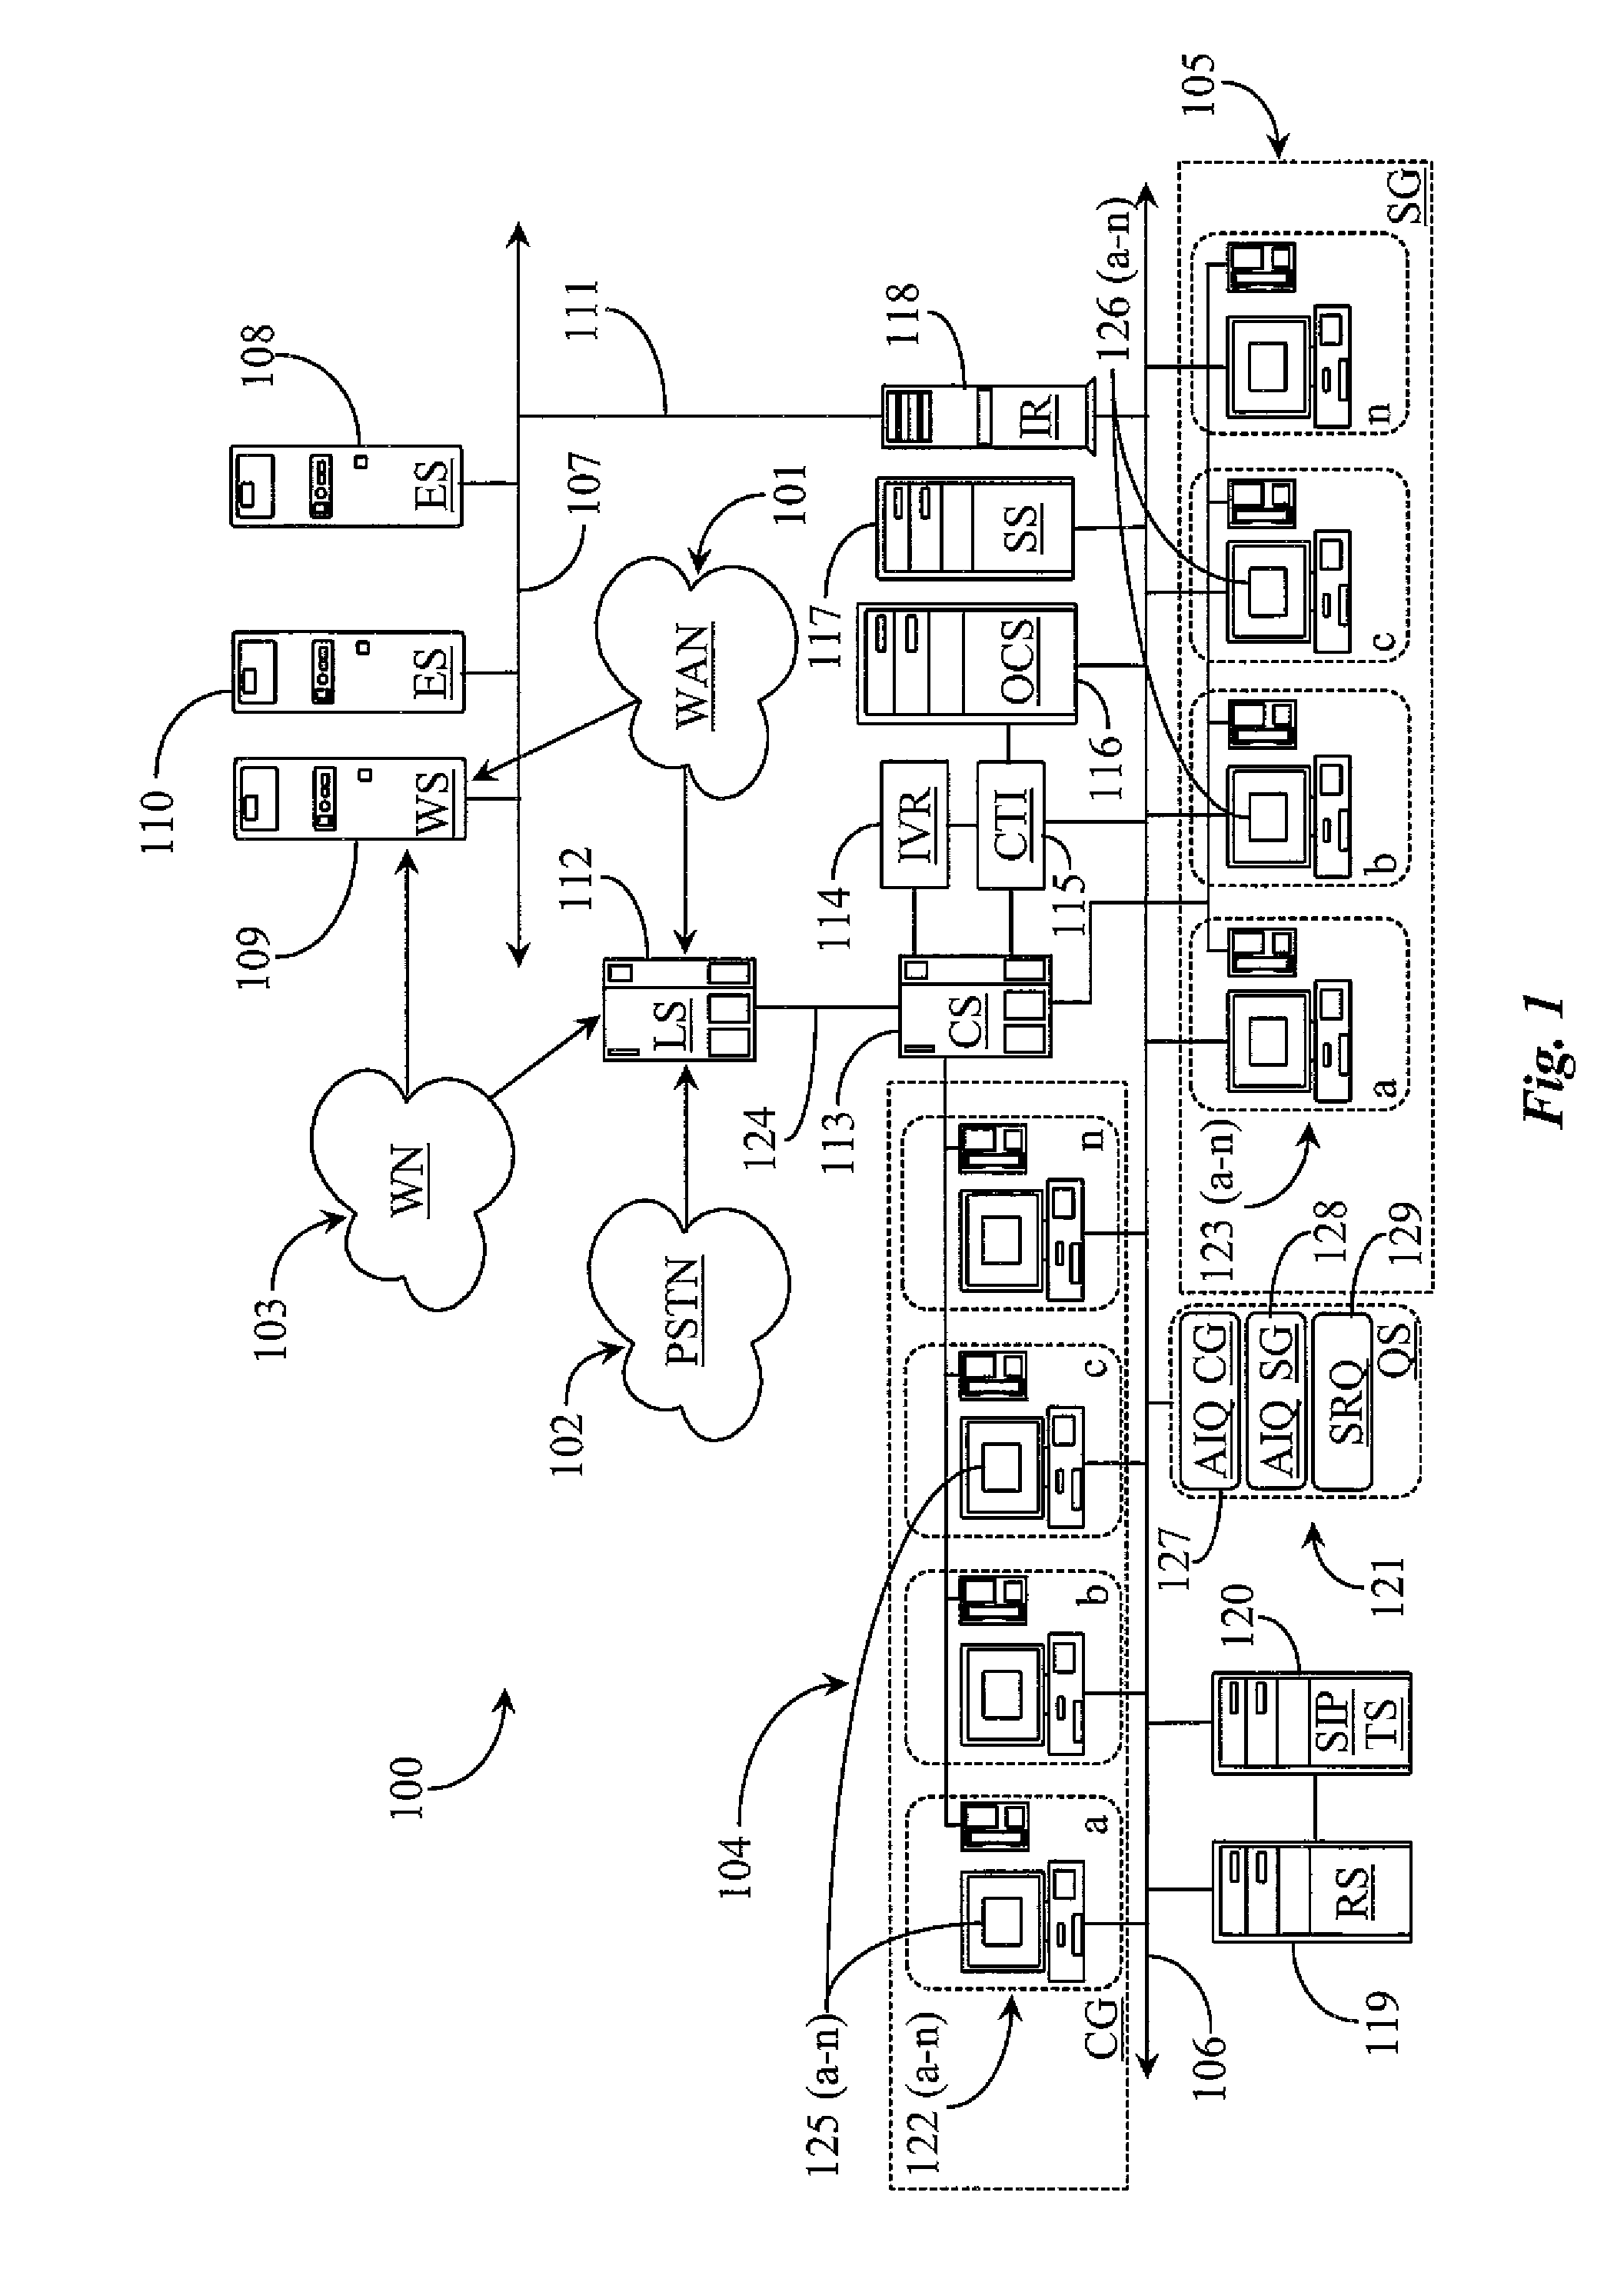 Multimedia Routing System for Securing Third Party Participation in Call Consultation or Call Transfer of a Call in Progress